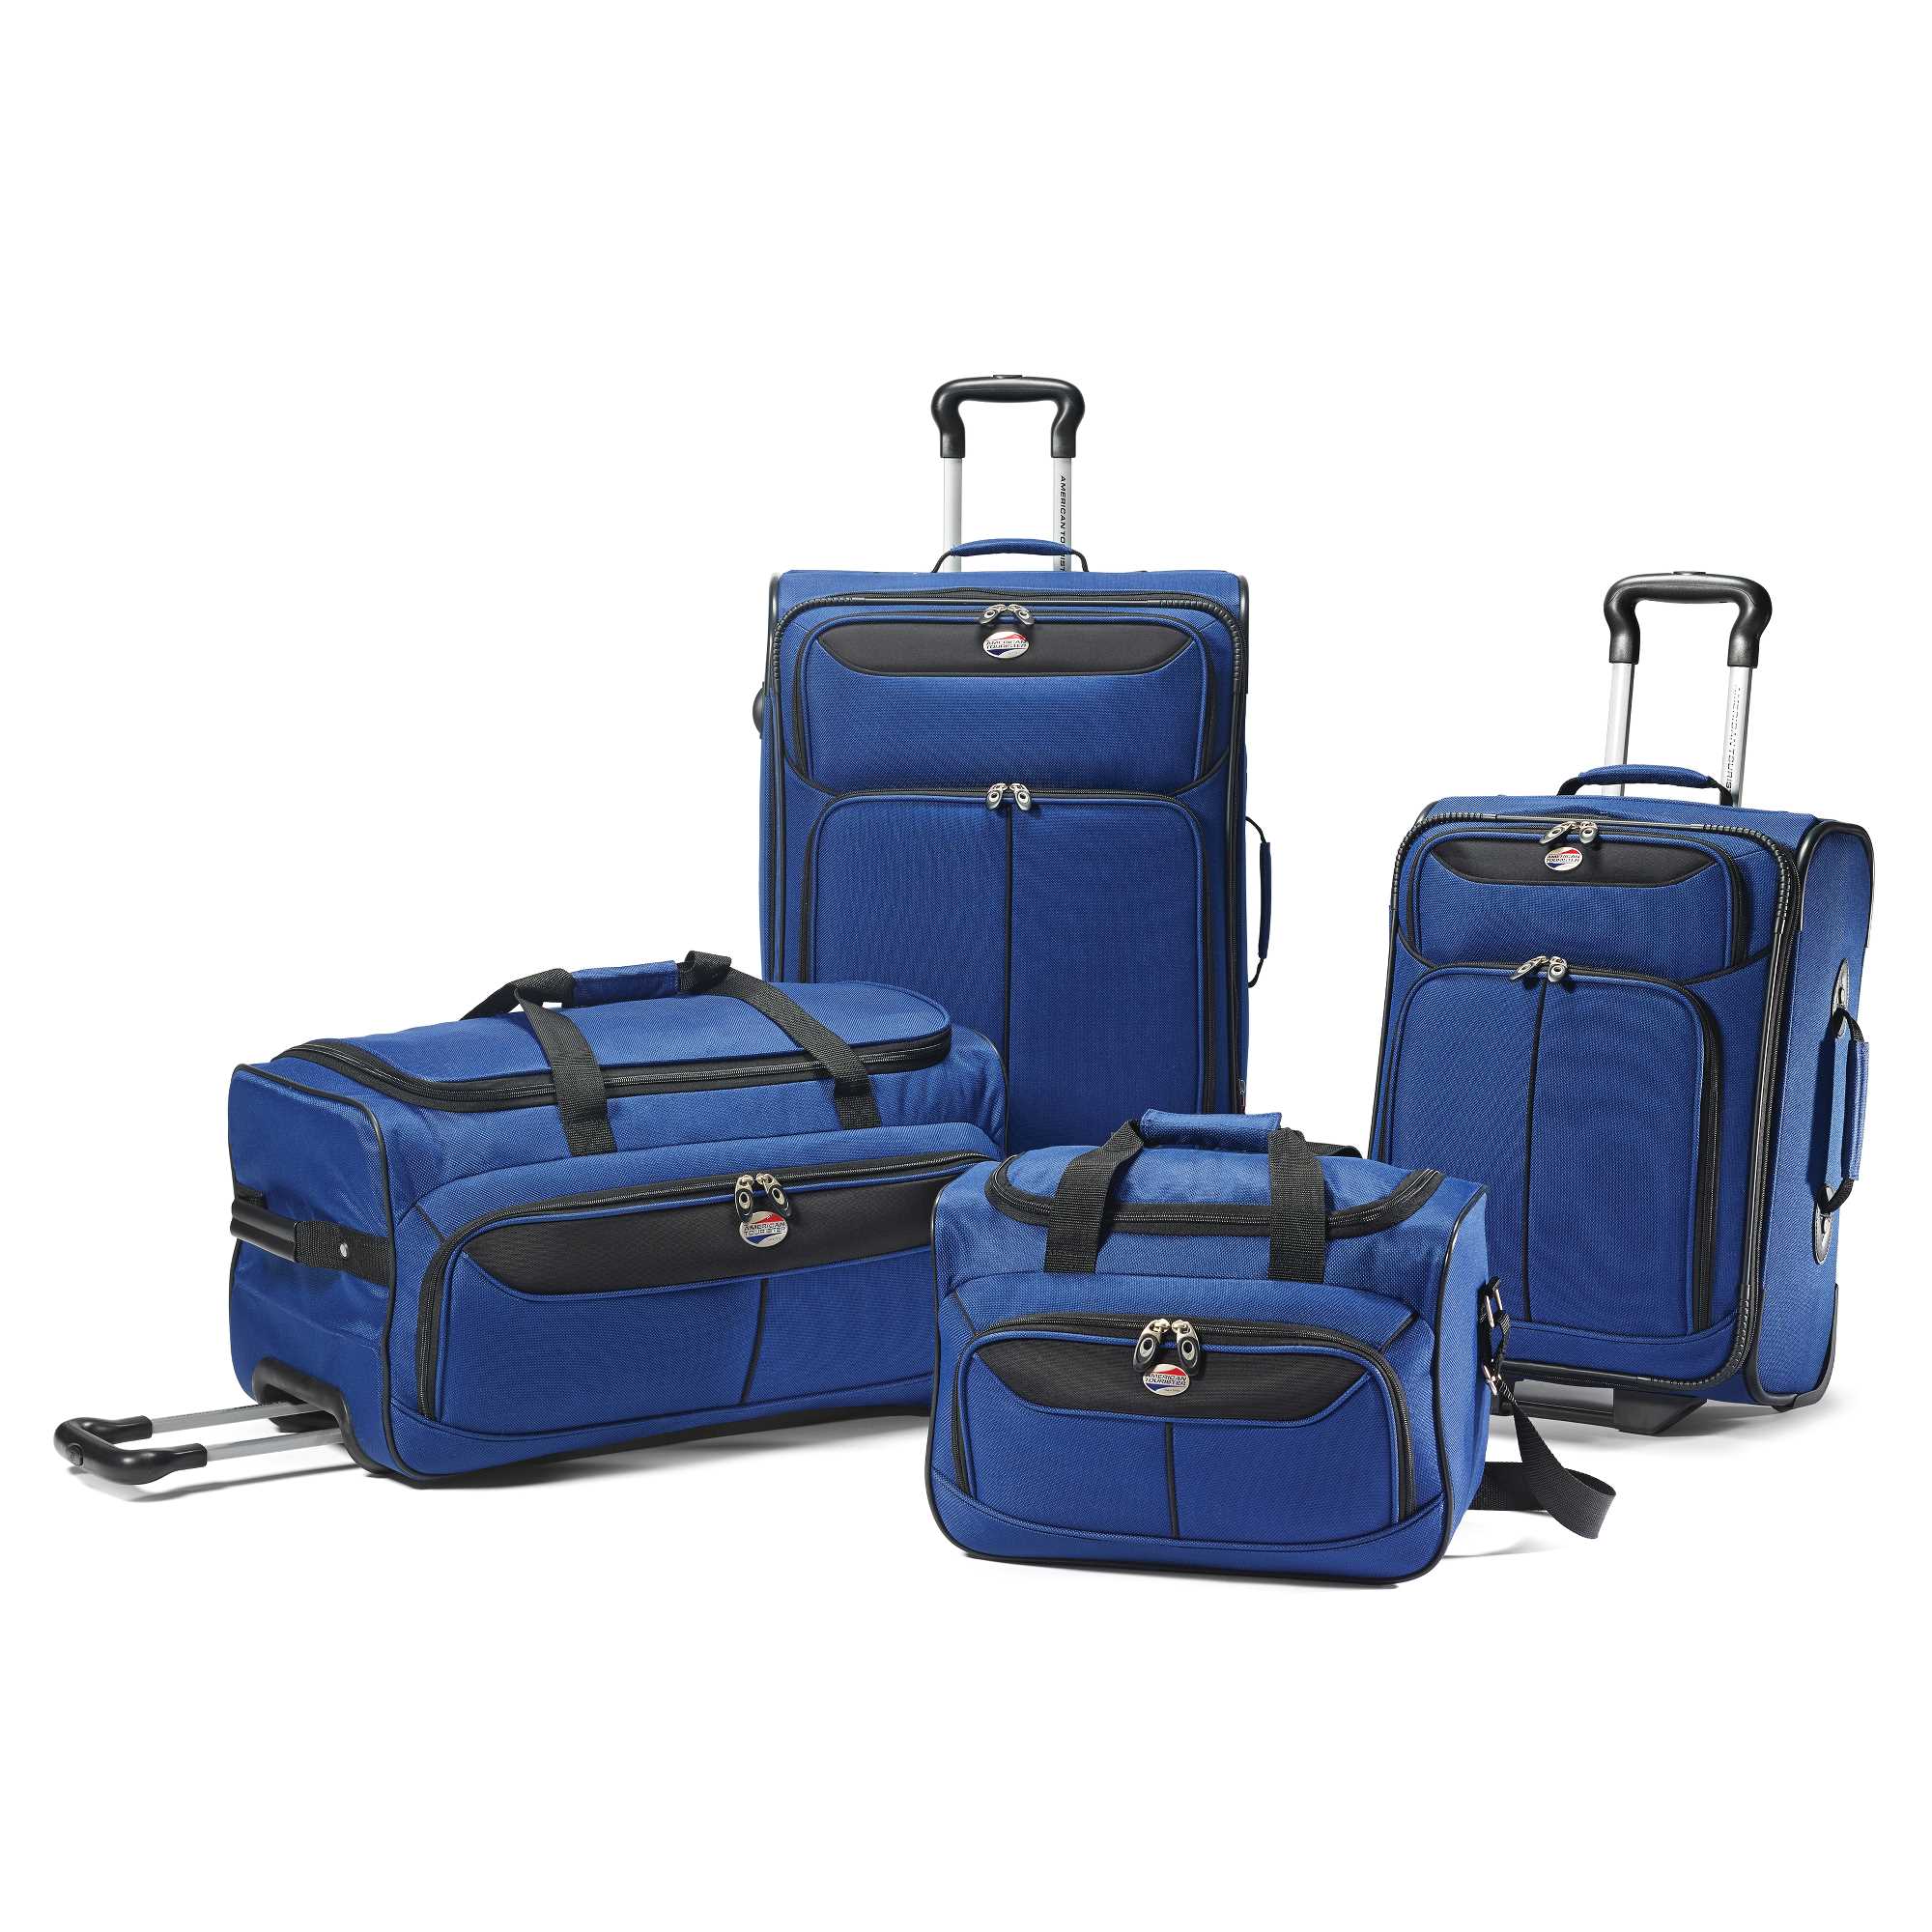 American Tourister 4-Piece Luggage Set - image 1 of 7